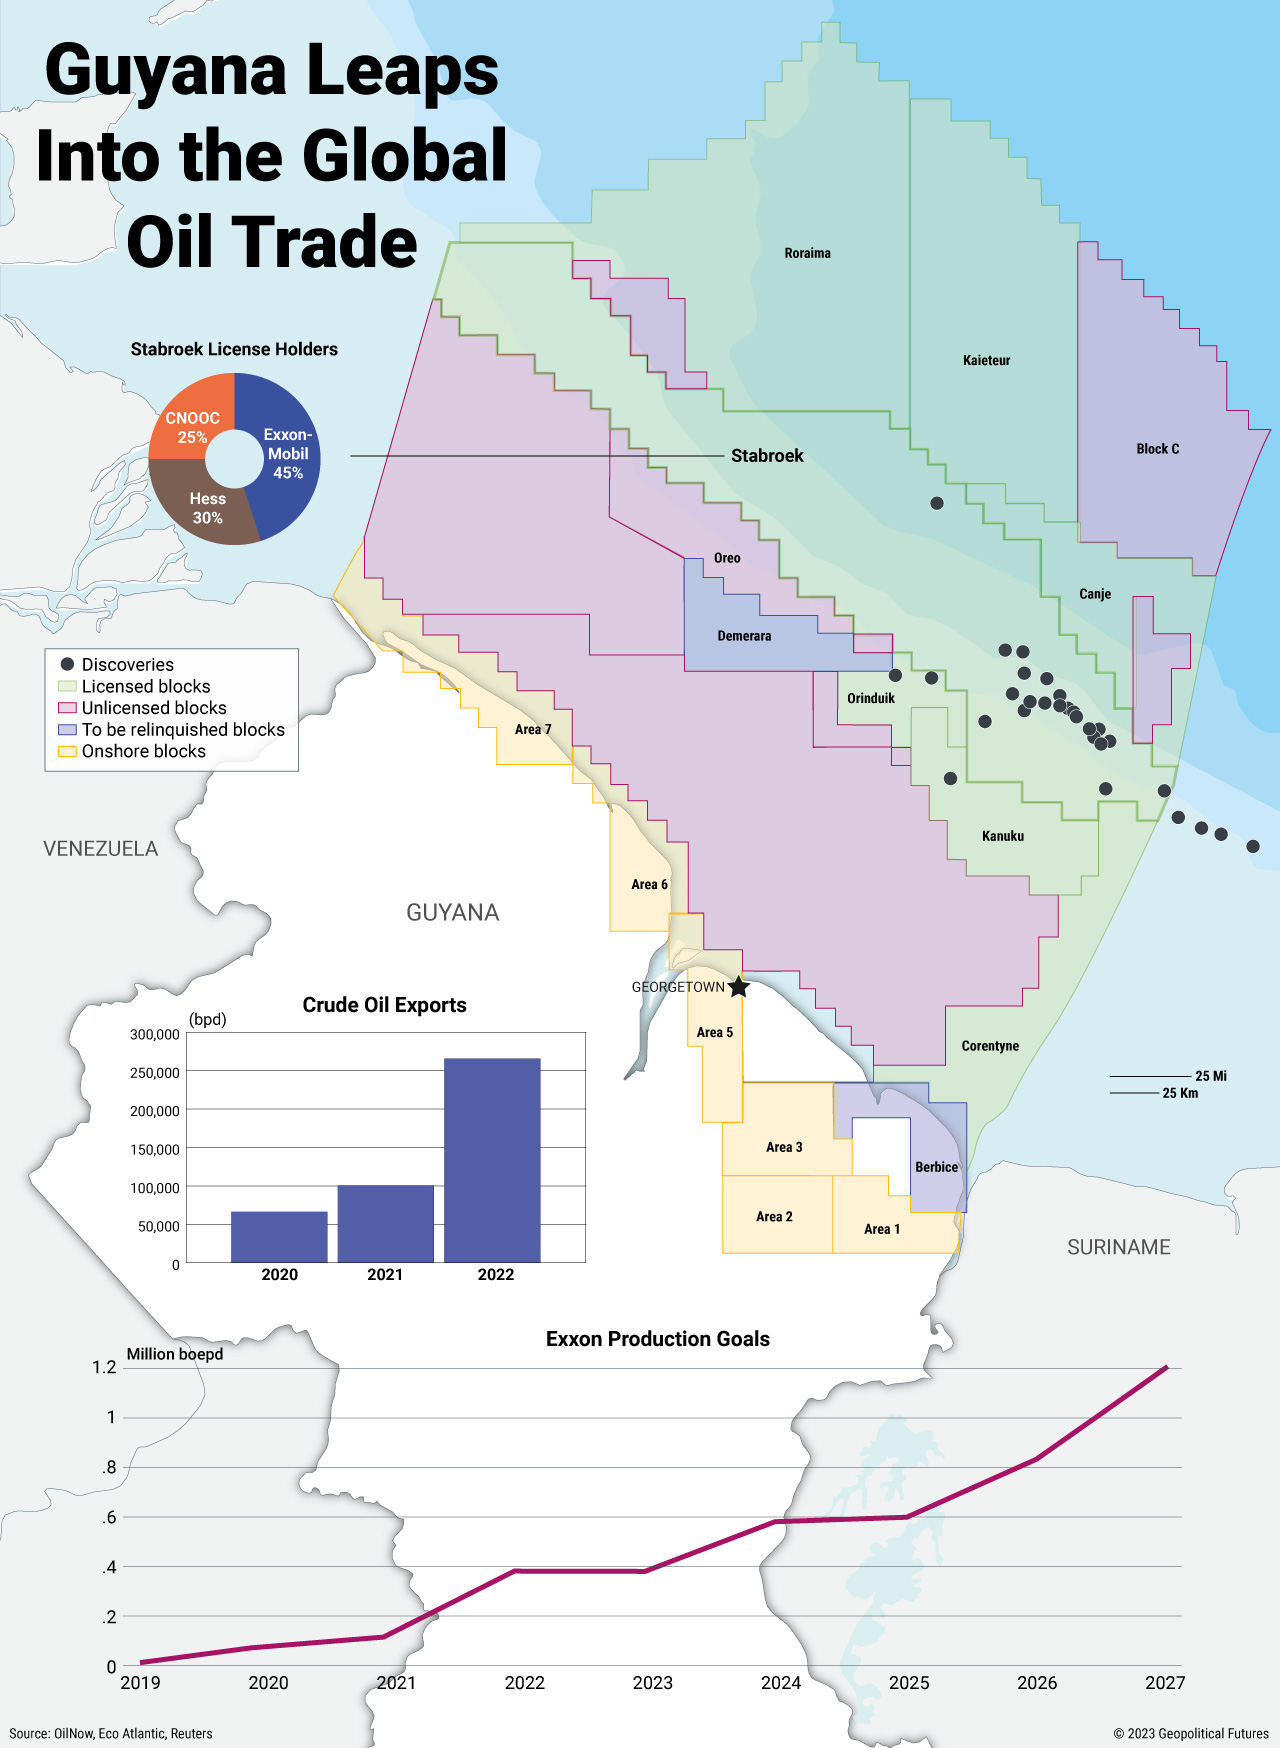 Guyana Leaps Into the Global Oil Trade